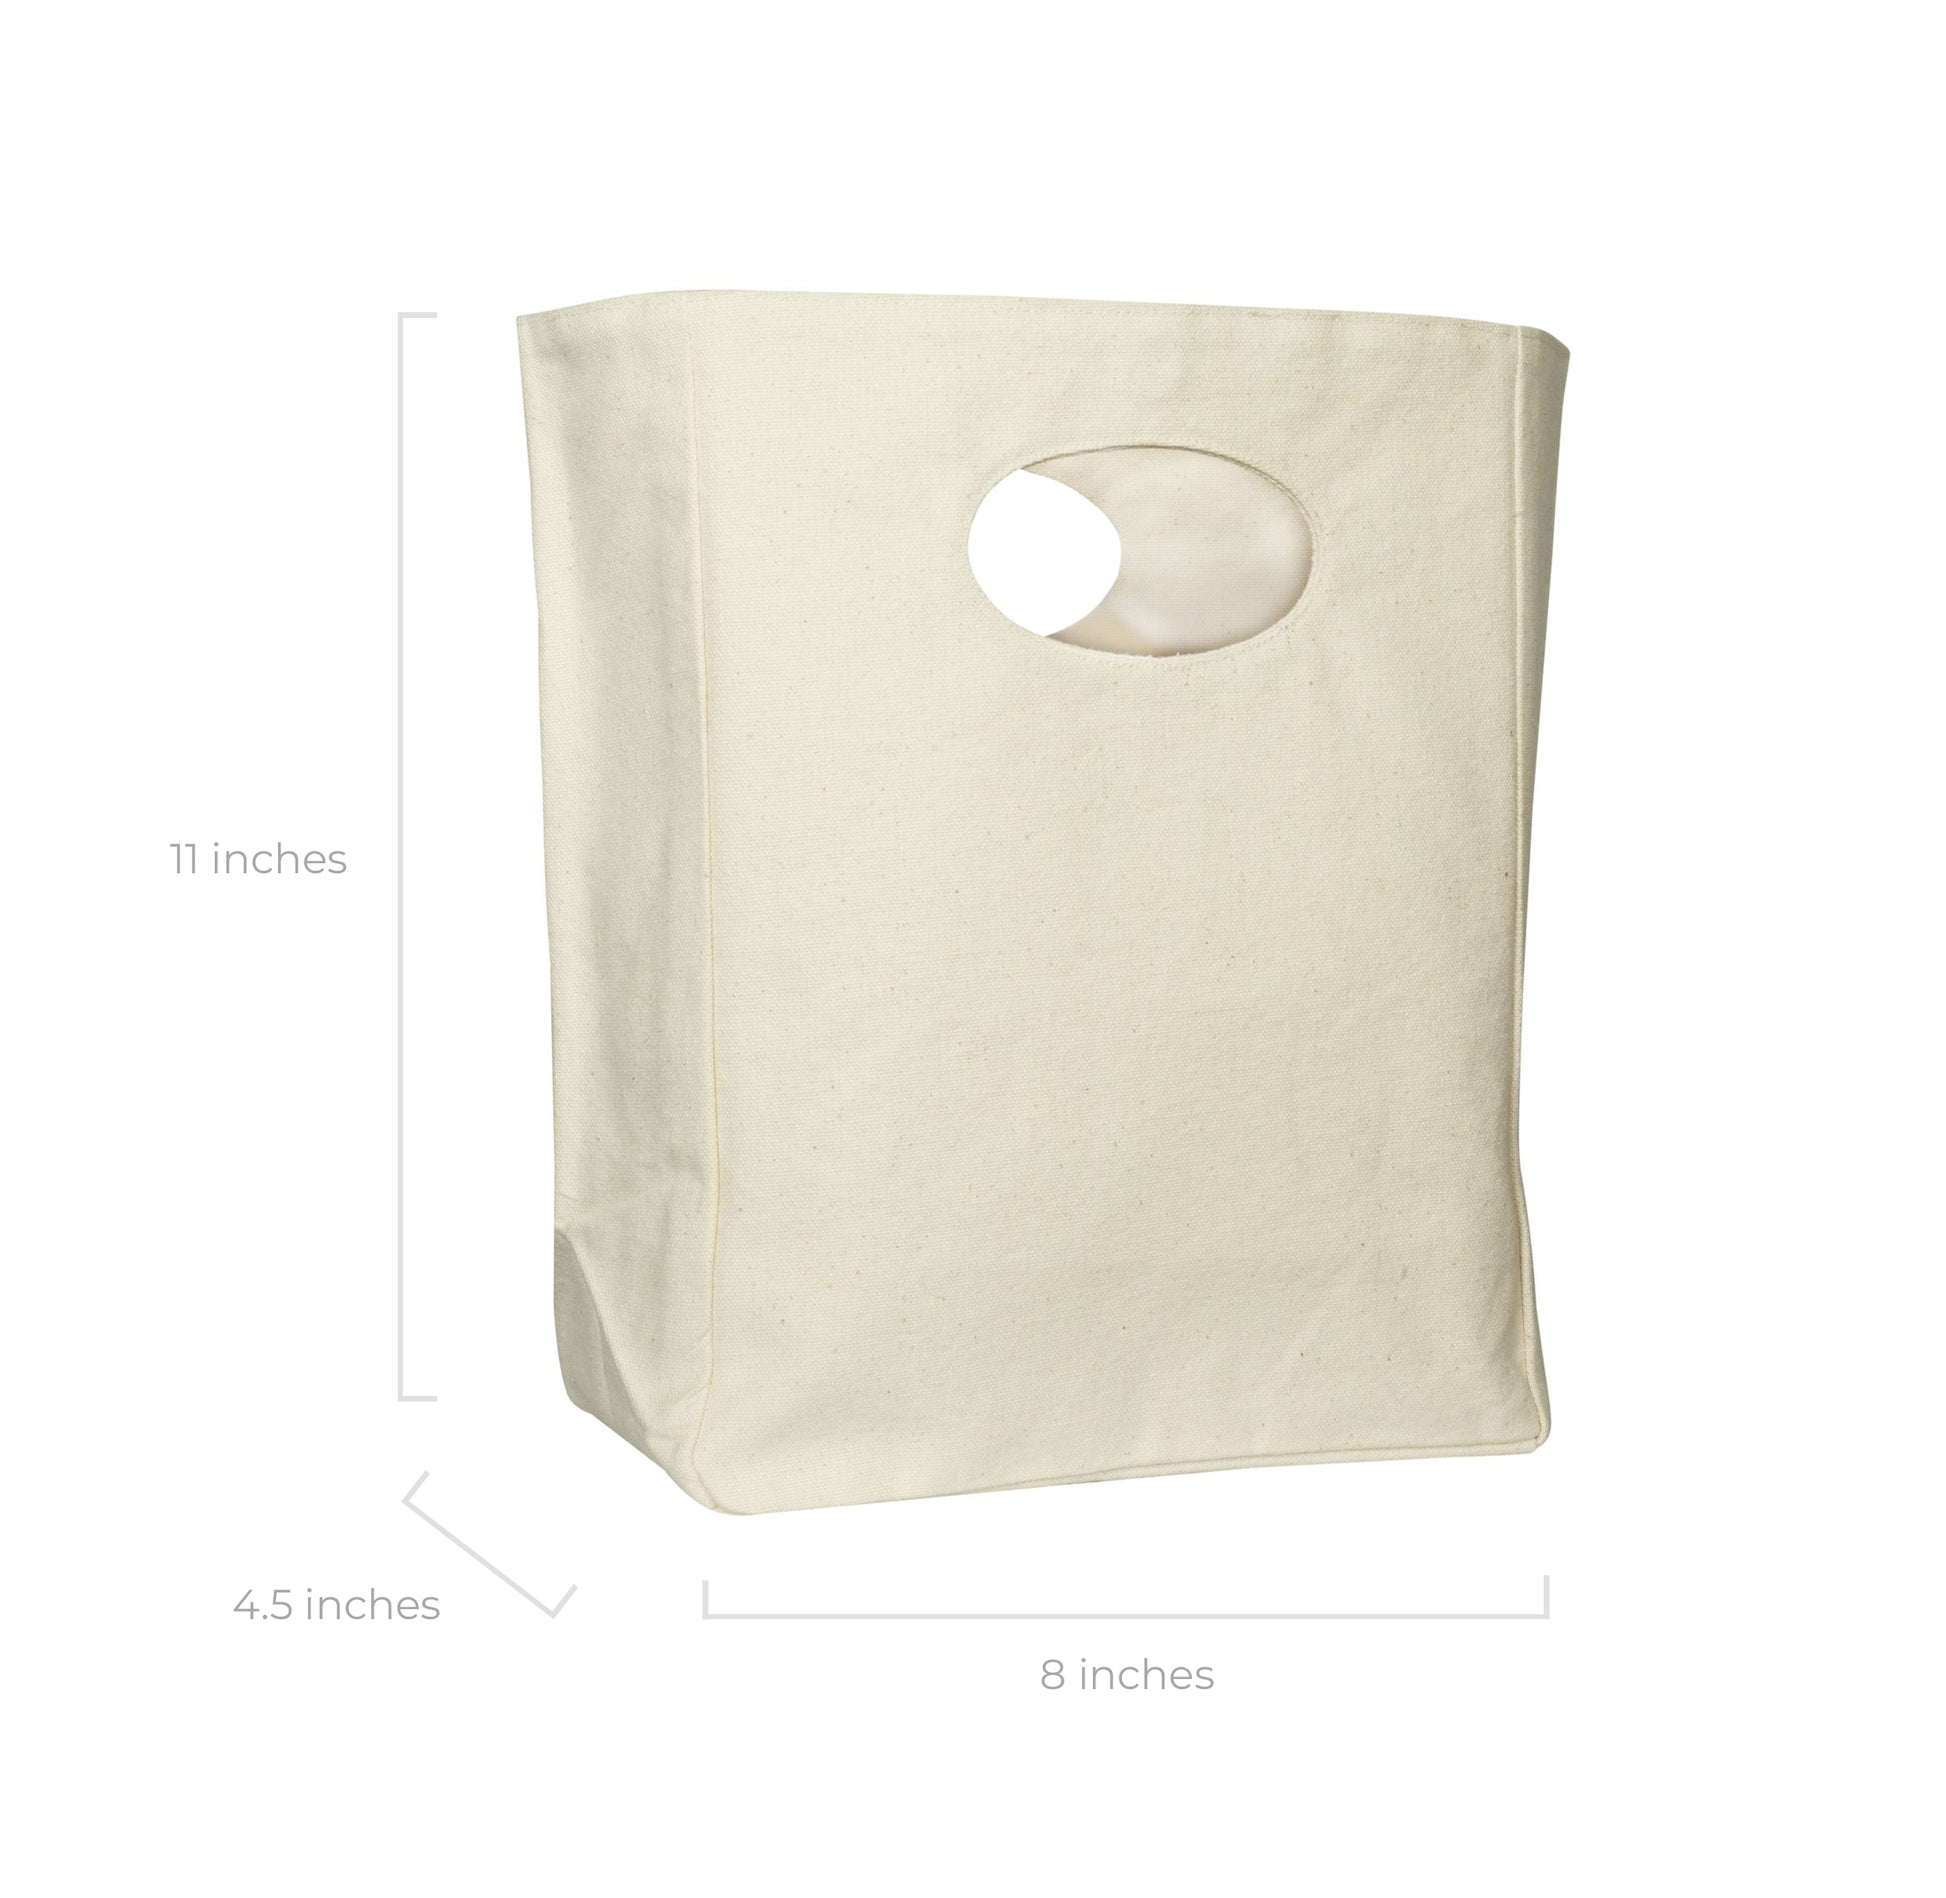 organic cotton lunch bag dimensions